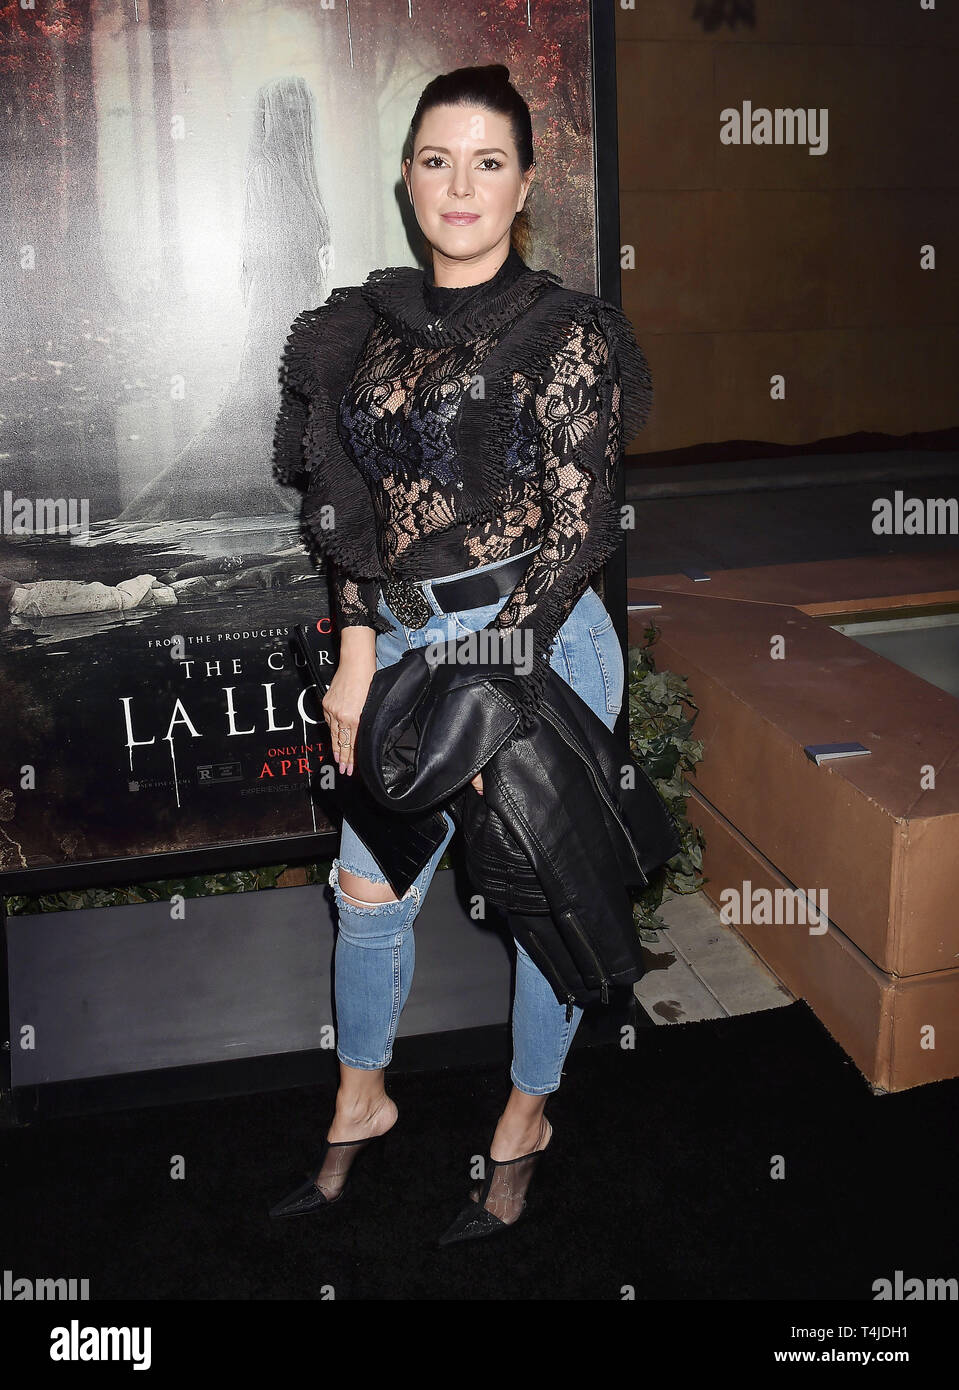 HOLLYWOOD, CA - APRIL 15: Alicia Machado arrives at the premiere of Warner Bros' 'The Curse Of La Llorona' at the Egyptian Theatre on April 15, 2019 in Hollywood, California. Stock Photo